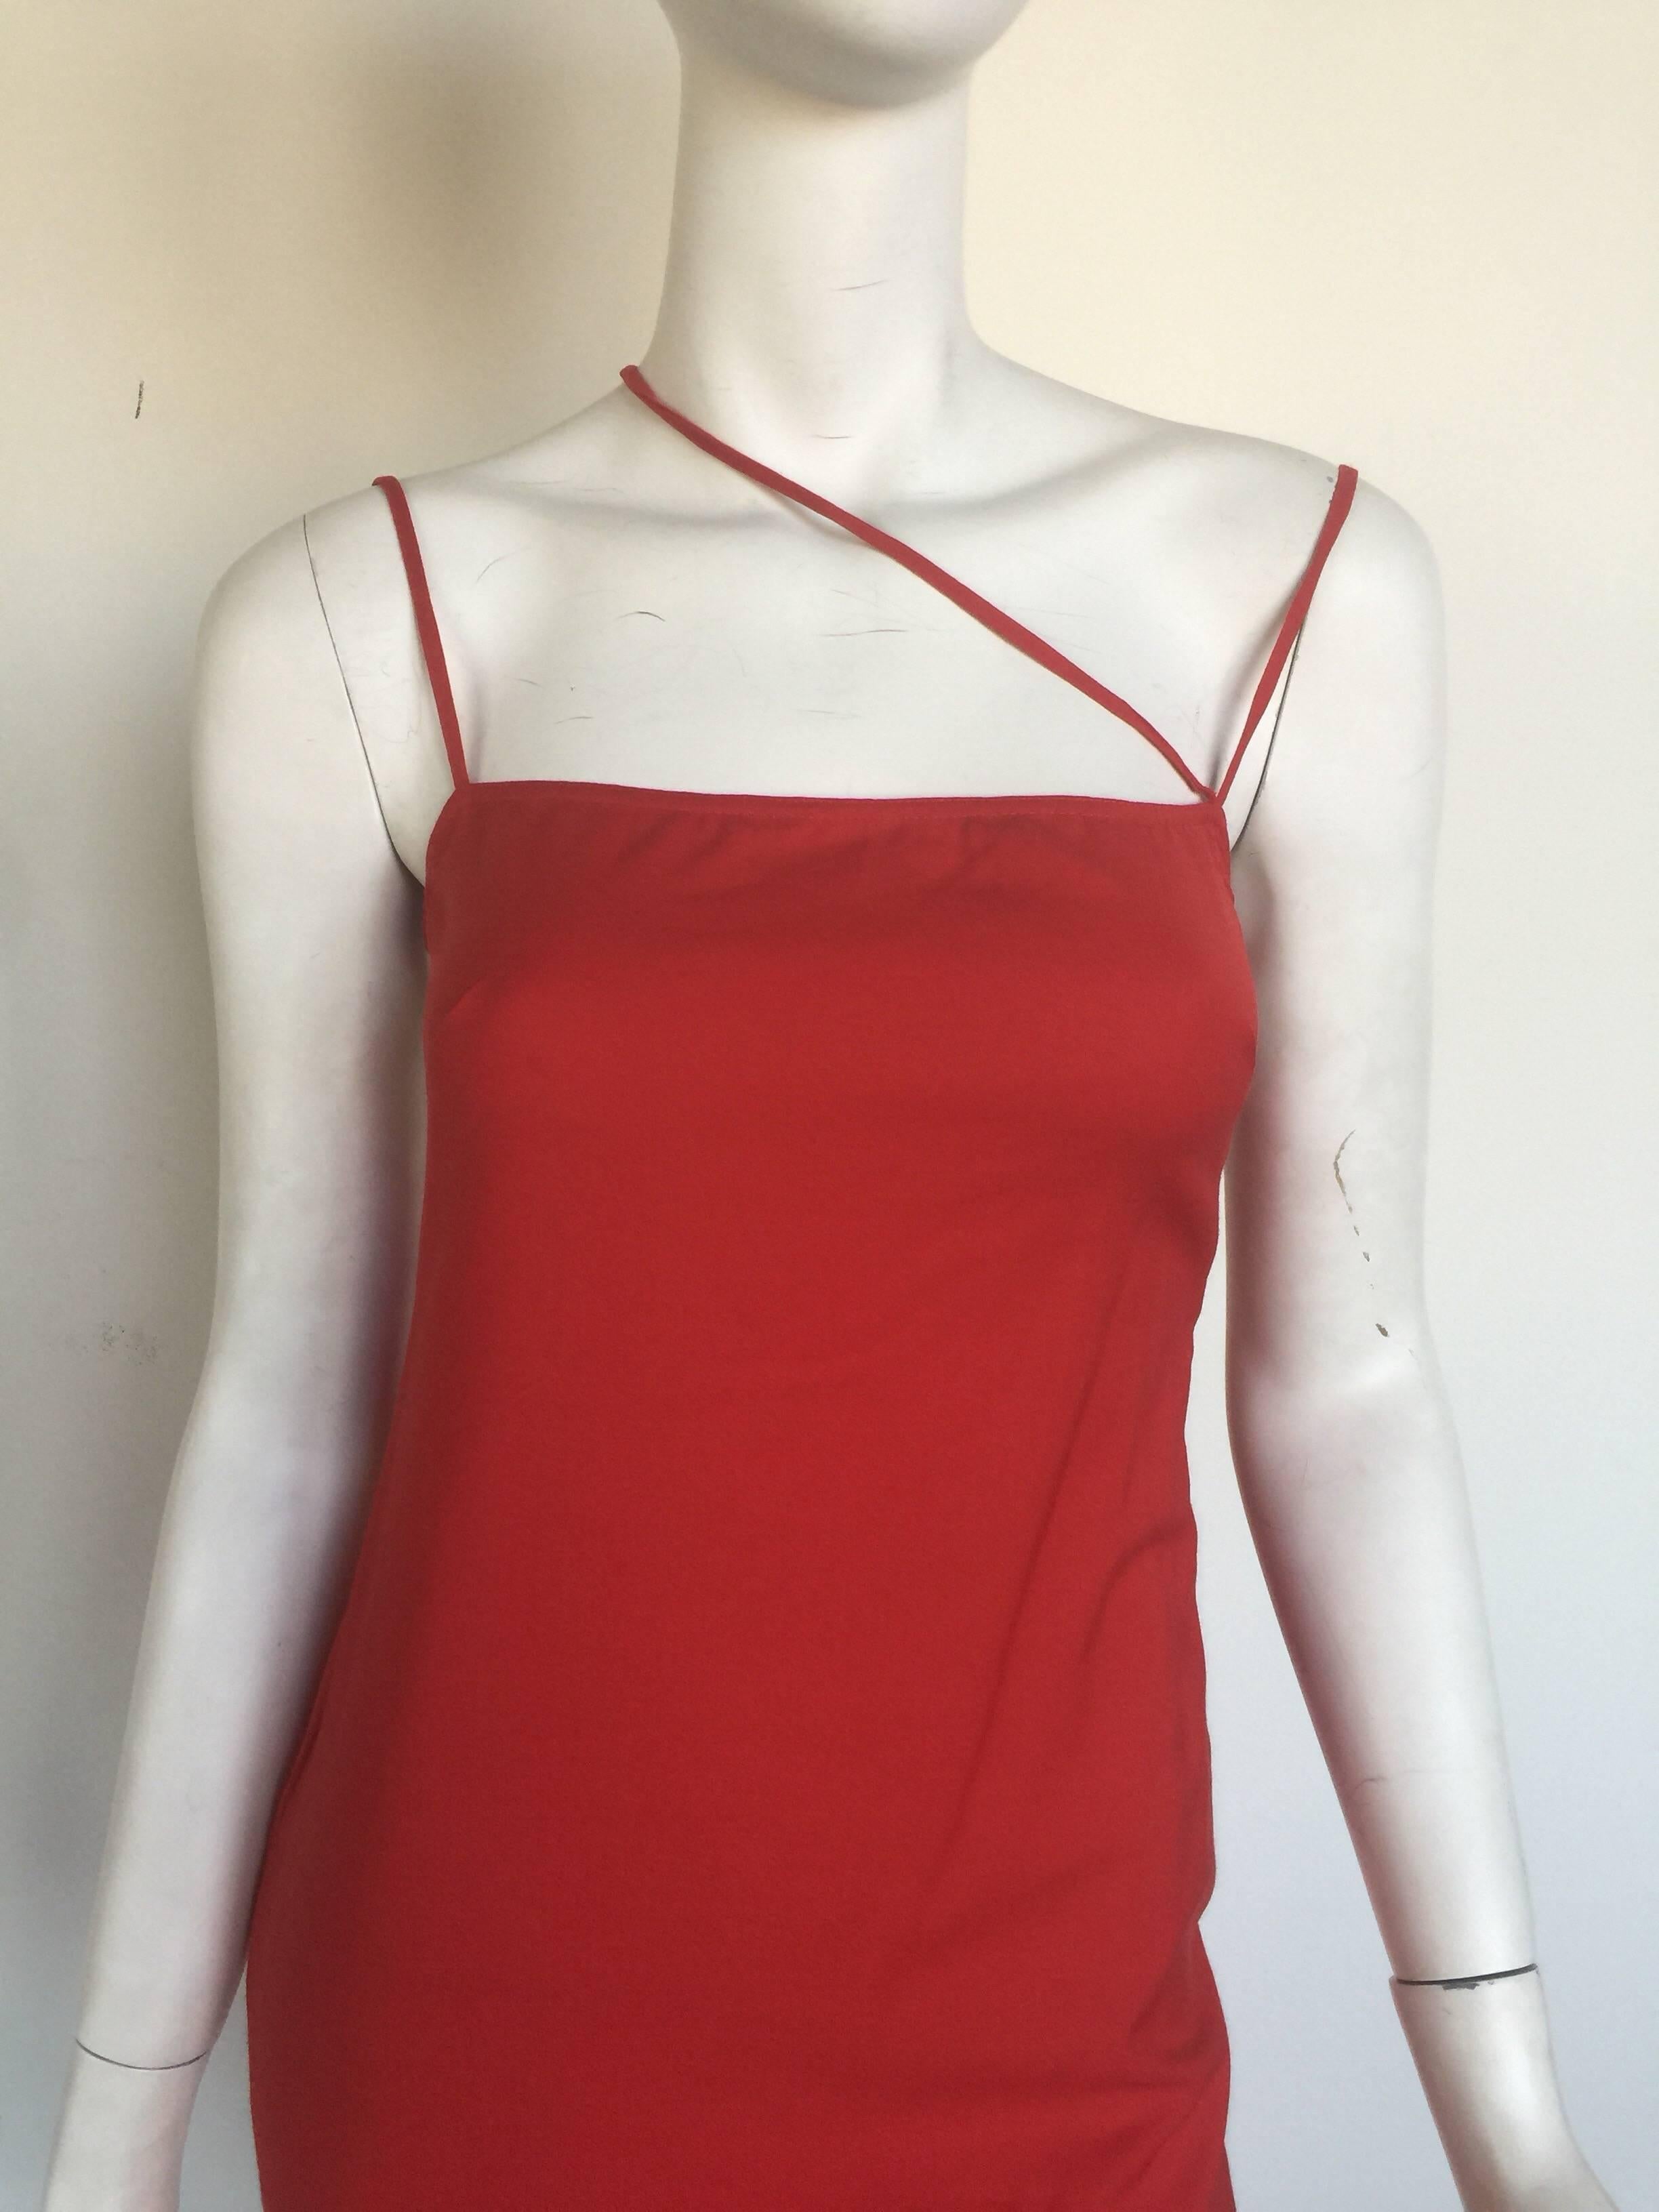 This Gianni Versace red mini dress has a scrappy back and shoulder details.  It is listed a size 38 and pretty true to size but please check measurements.  